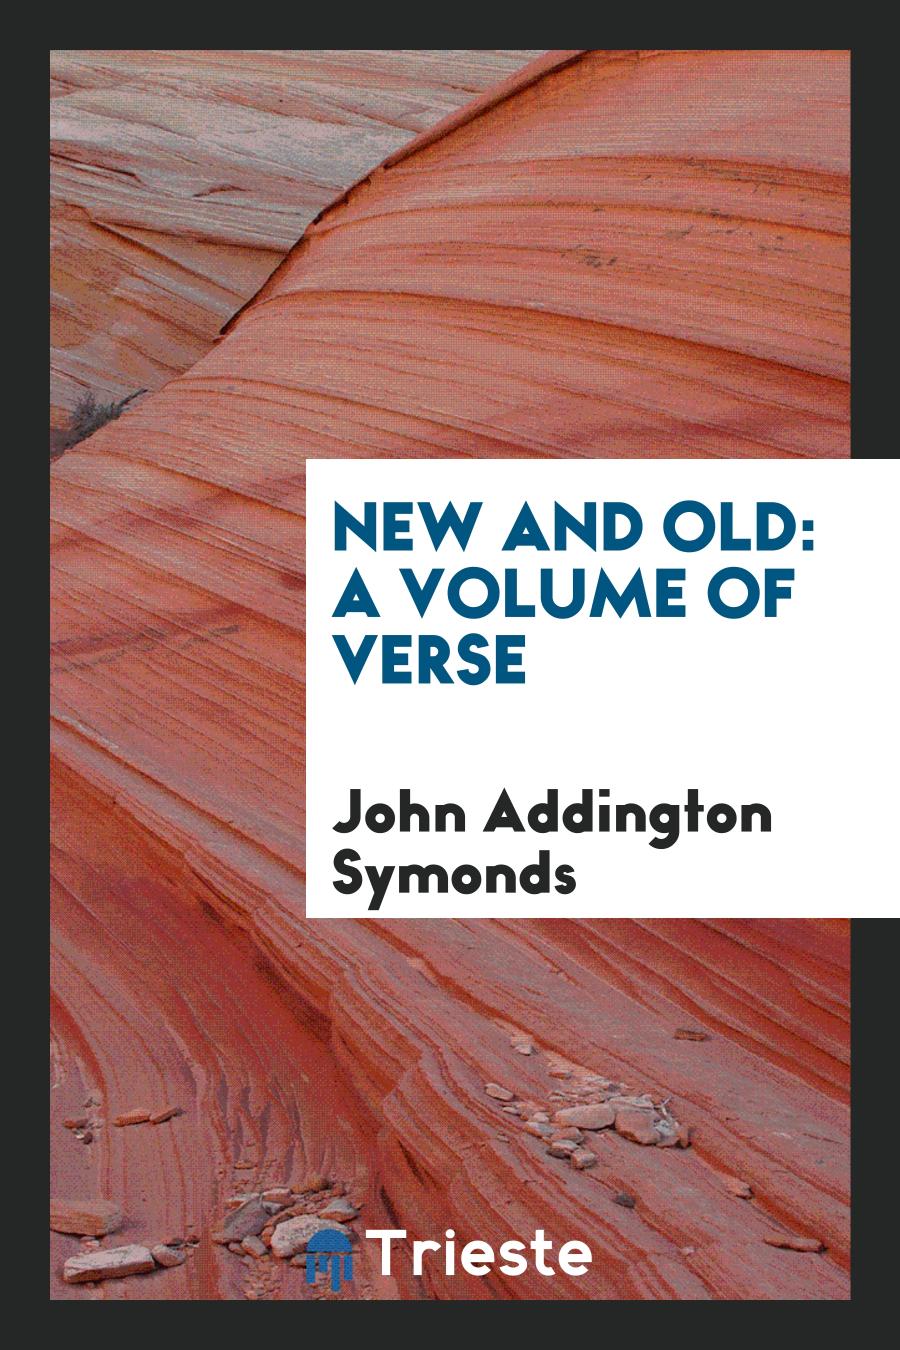 New and Old: A Volume of Verse